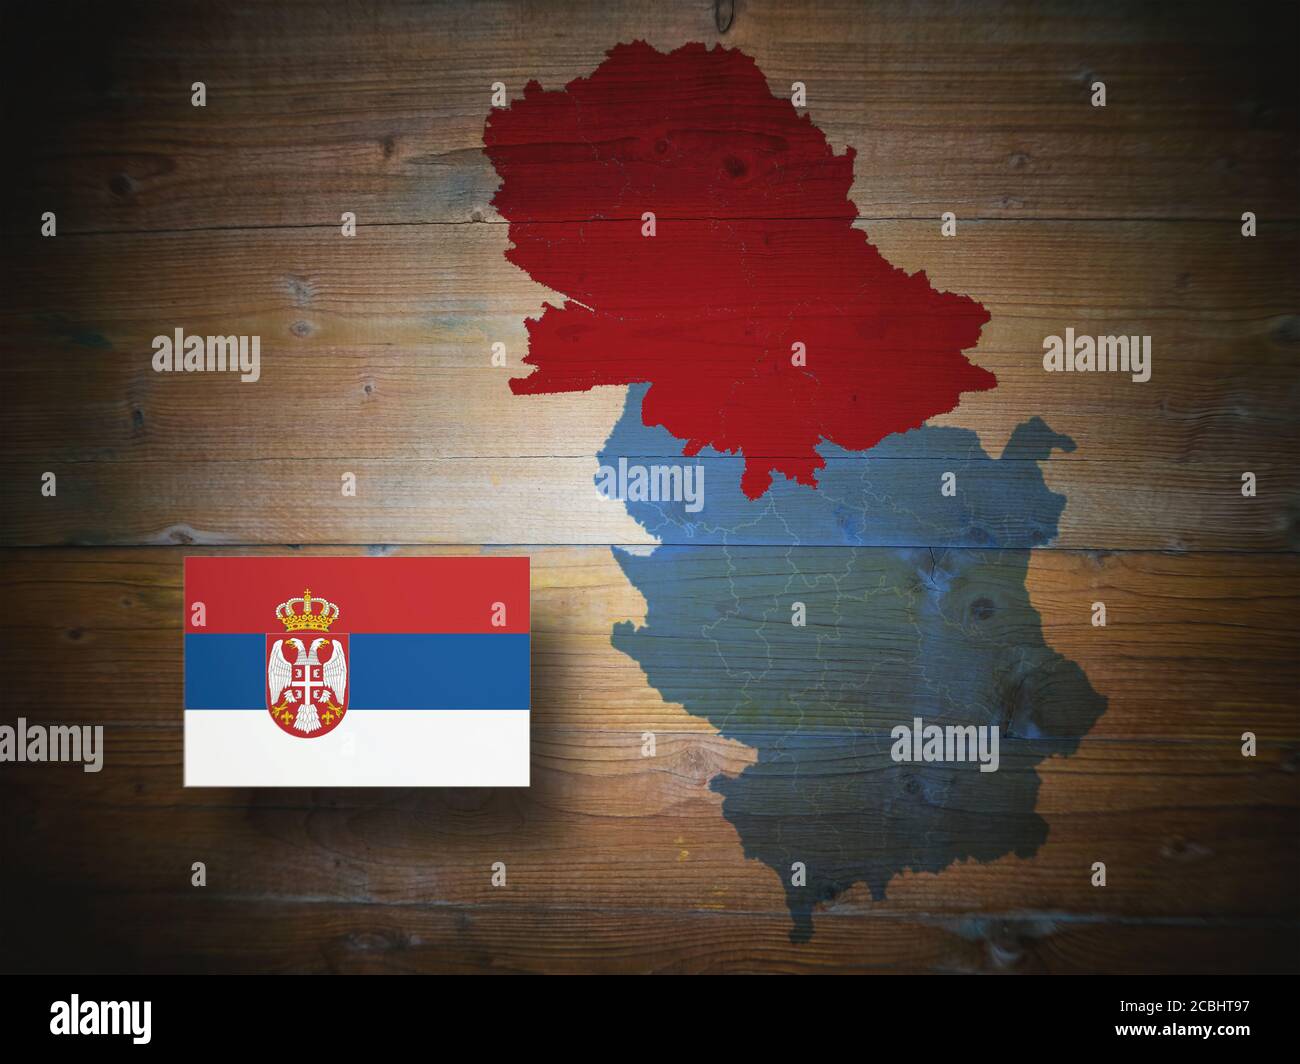 Map of the Republic of Serbia and the Autonomous Province of Vojvodina, flag of the Republic of Serbia, on a wooden background,, 3D illustration Stock Photo